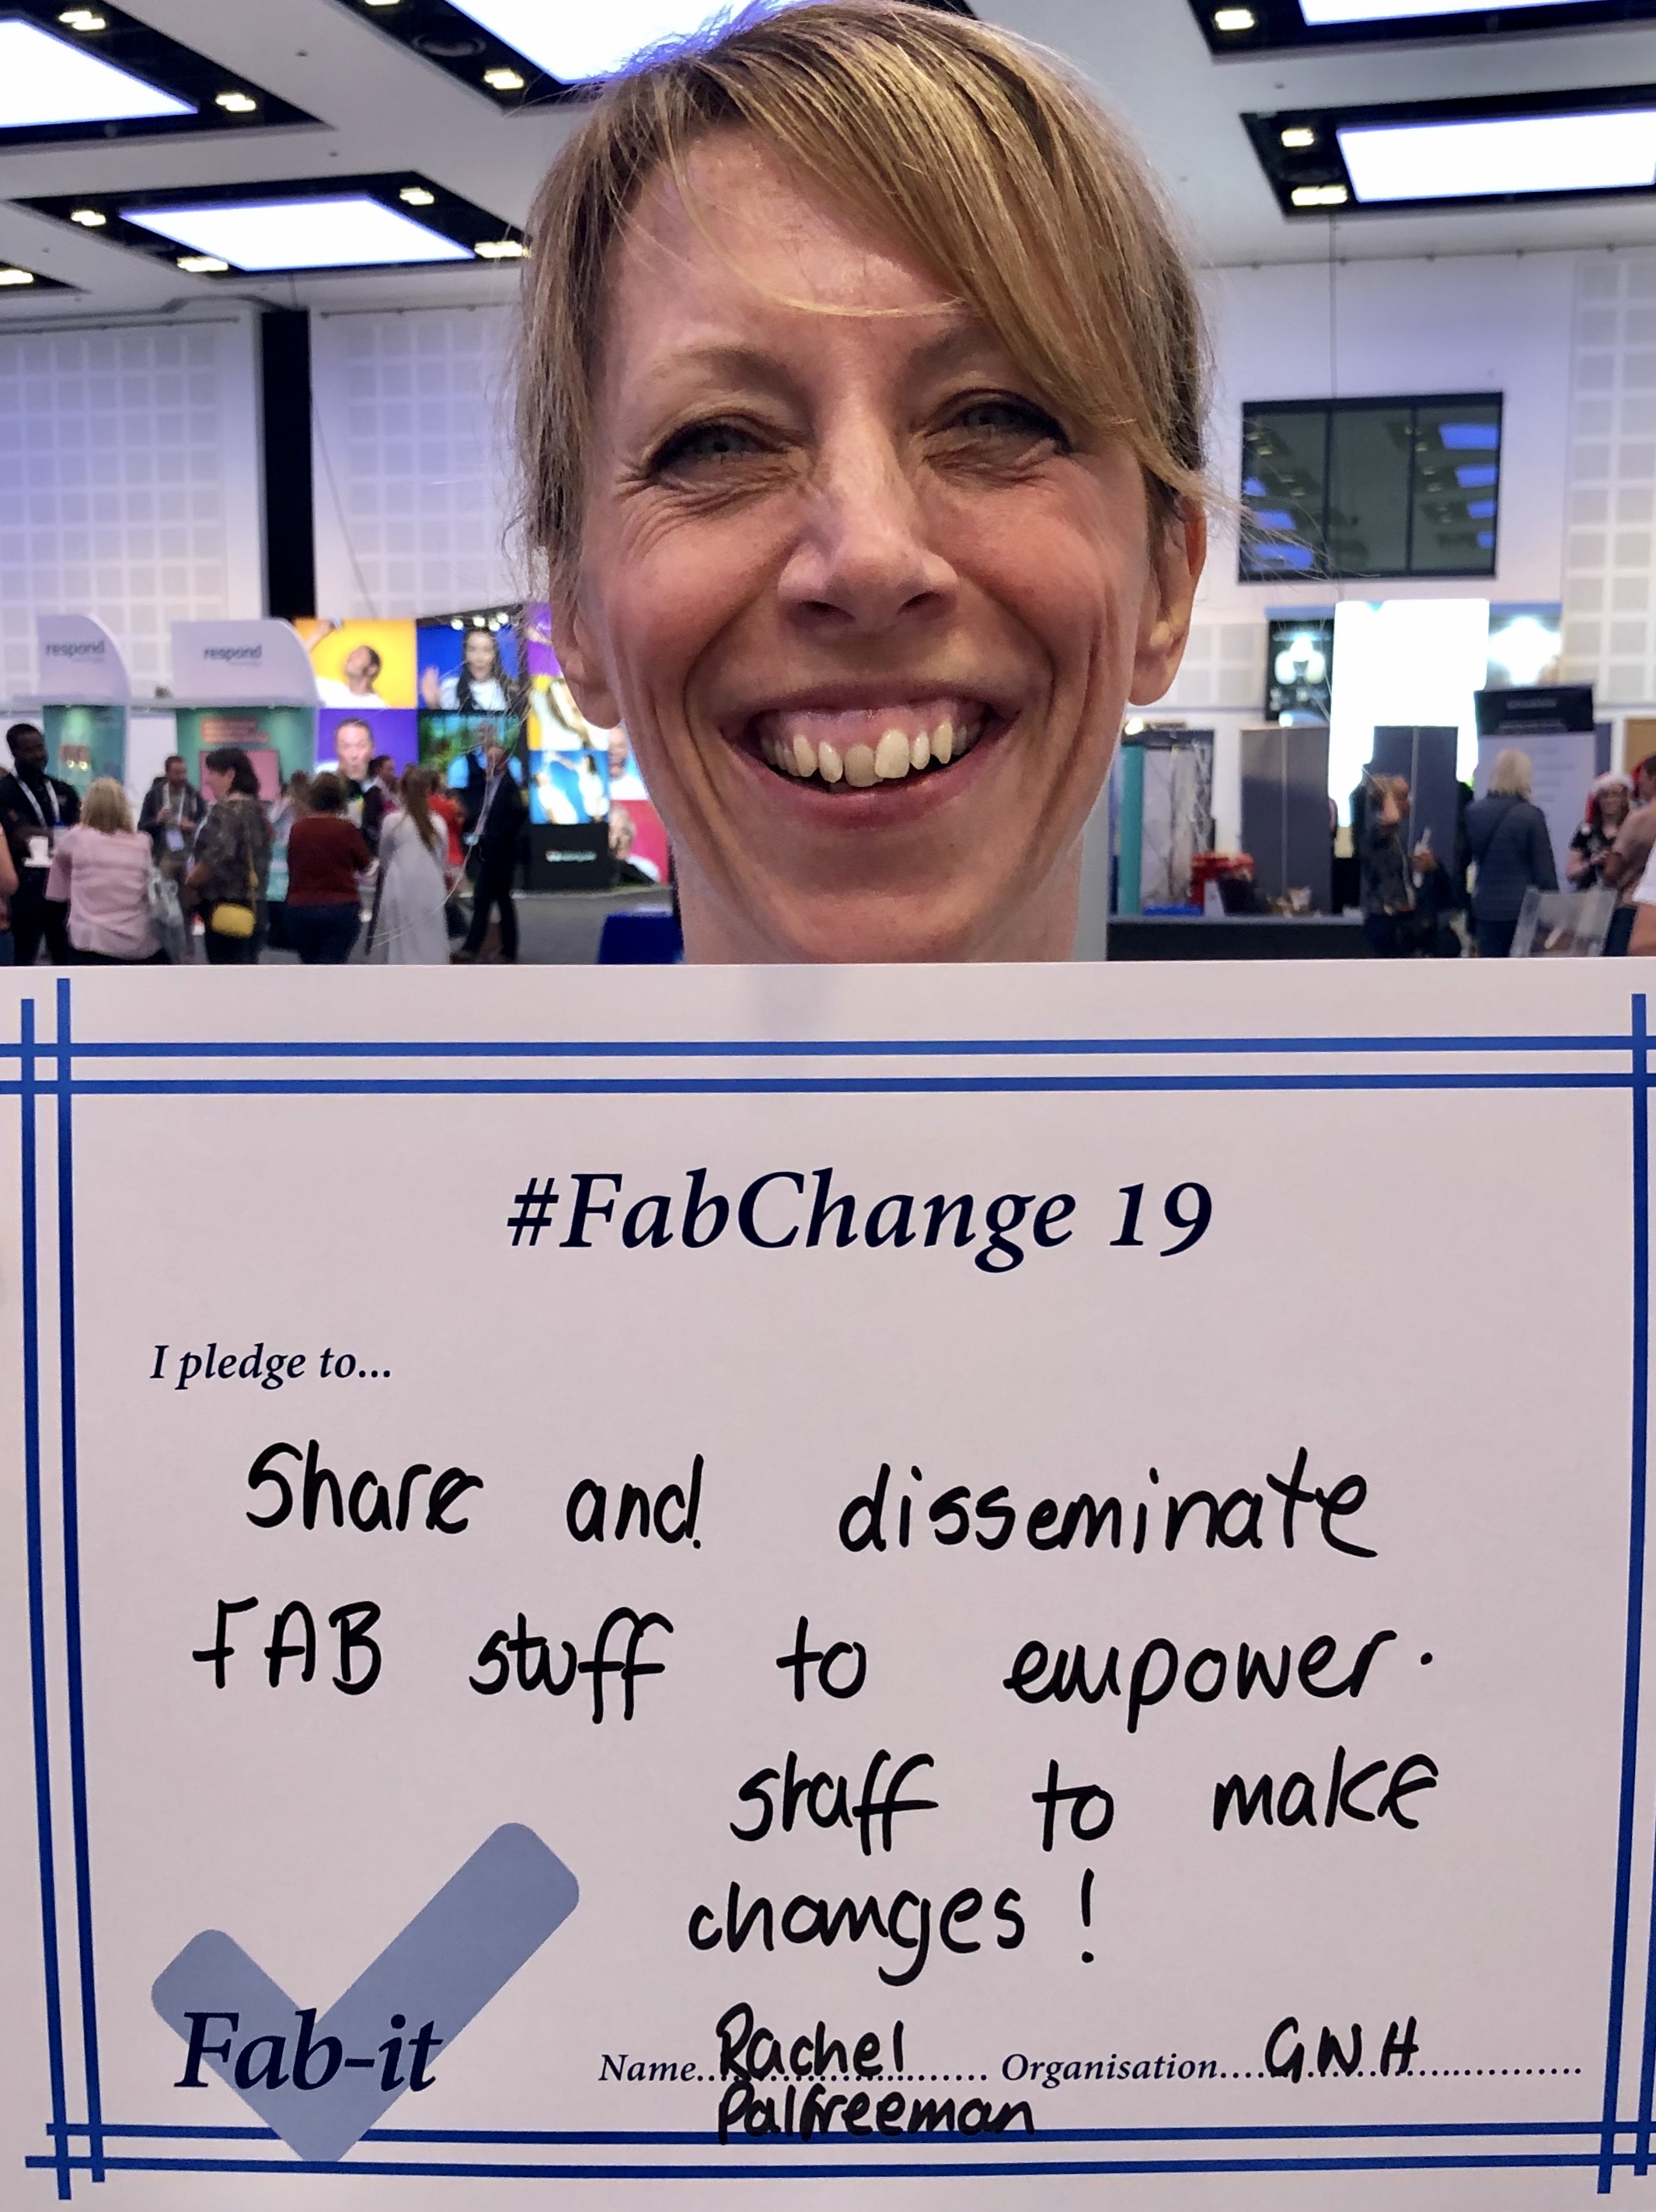 Share & disseminate Fab Stuff to empower staff to make changes featured image